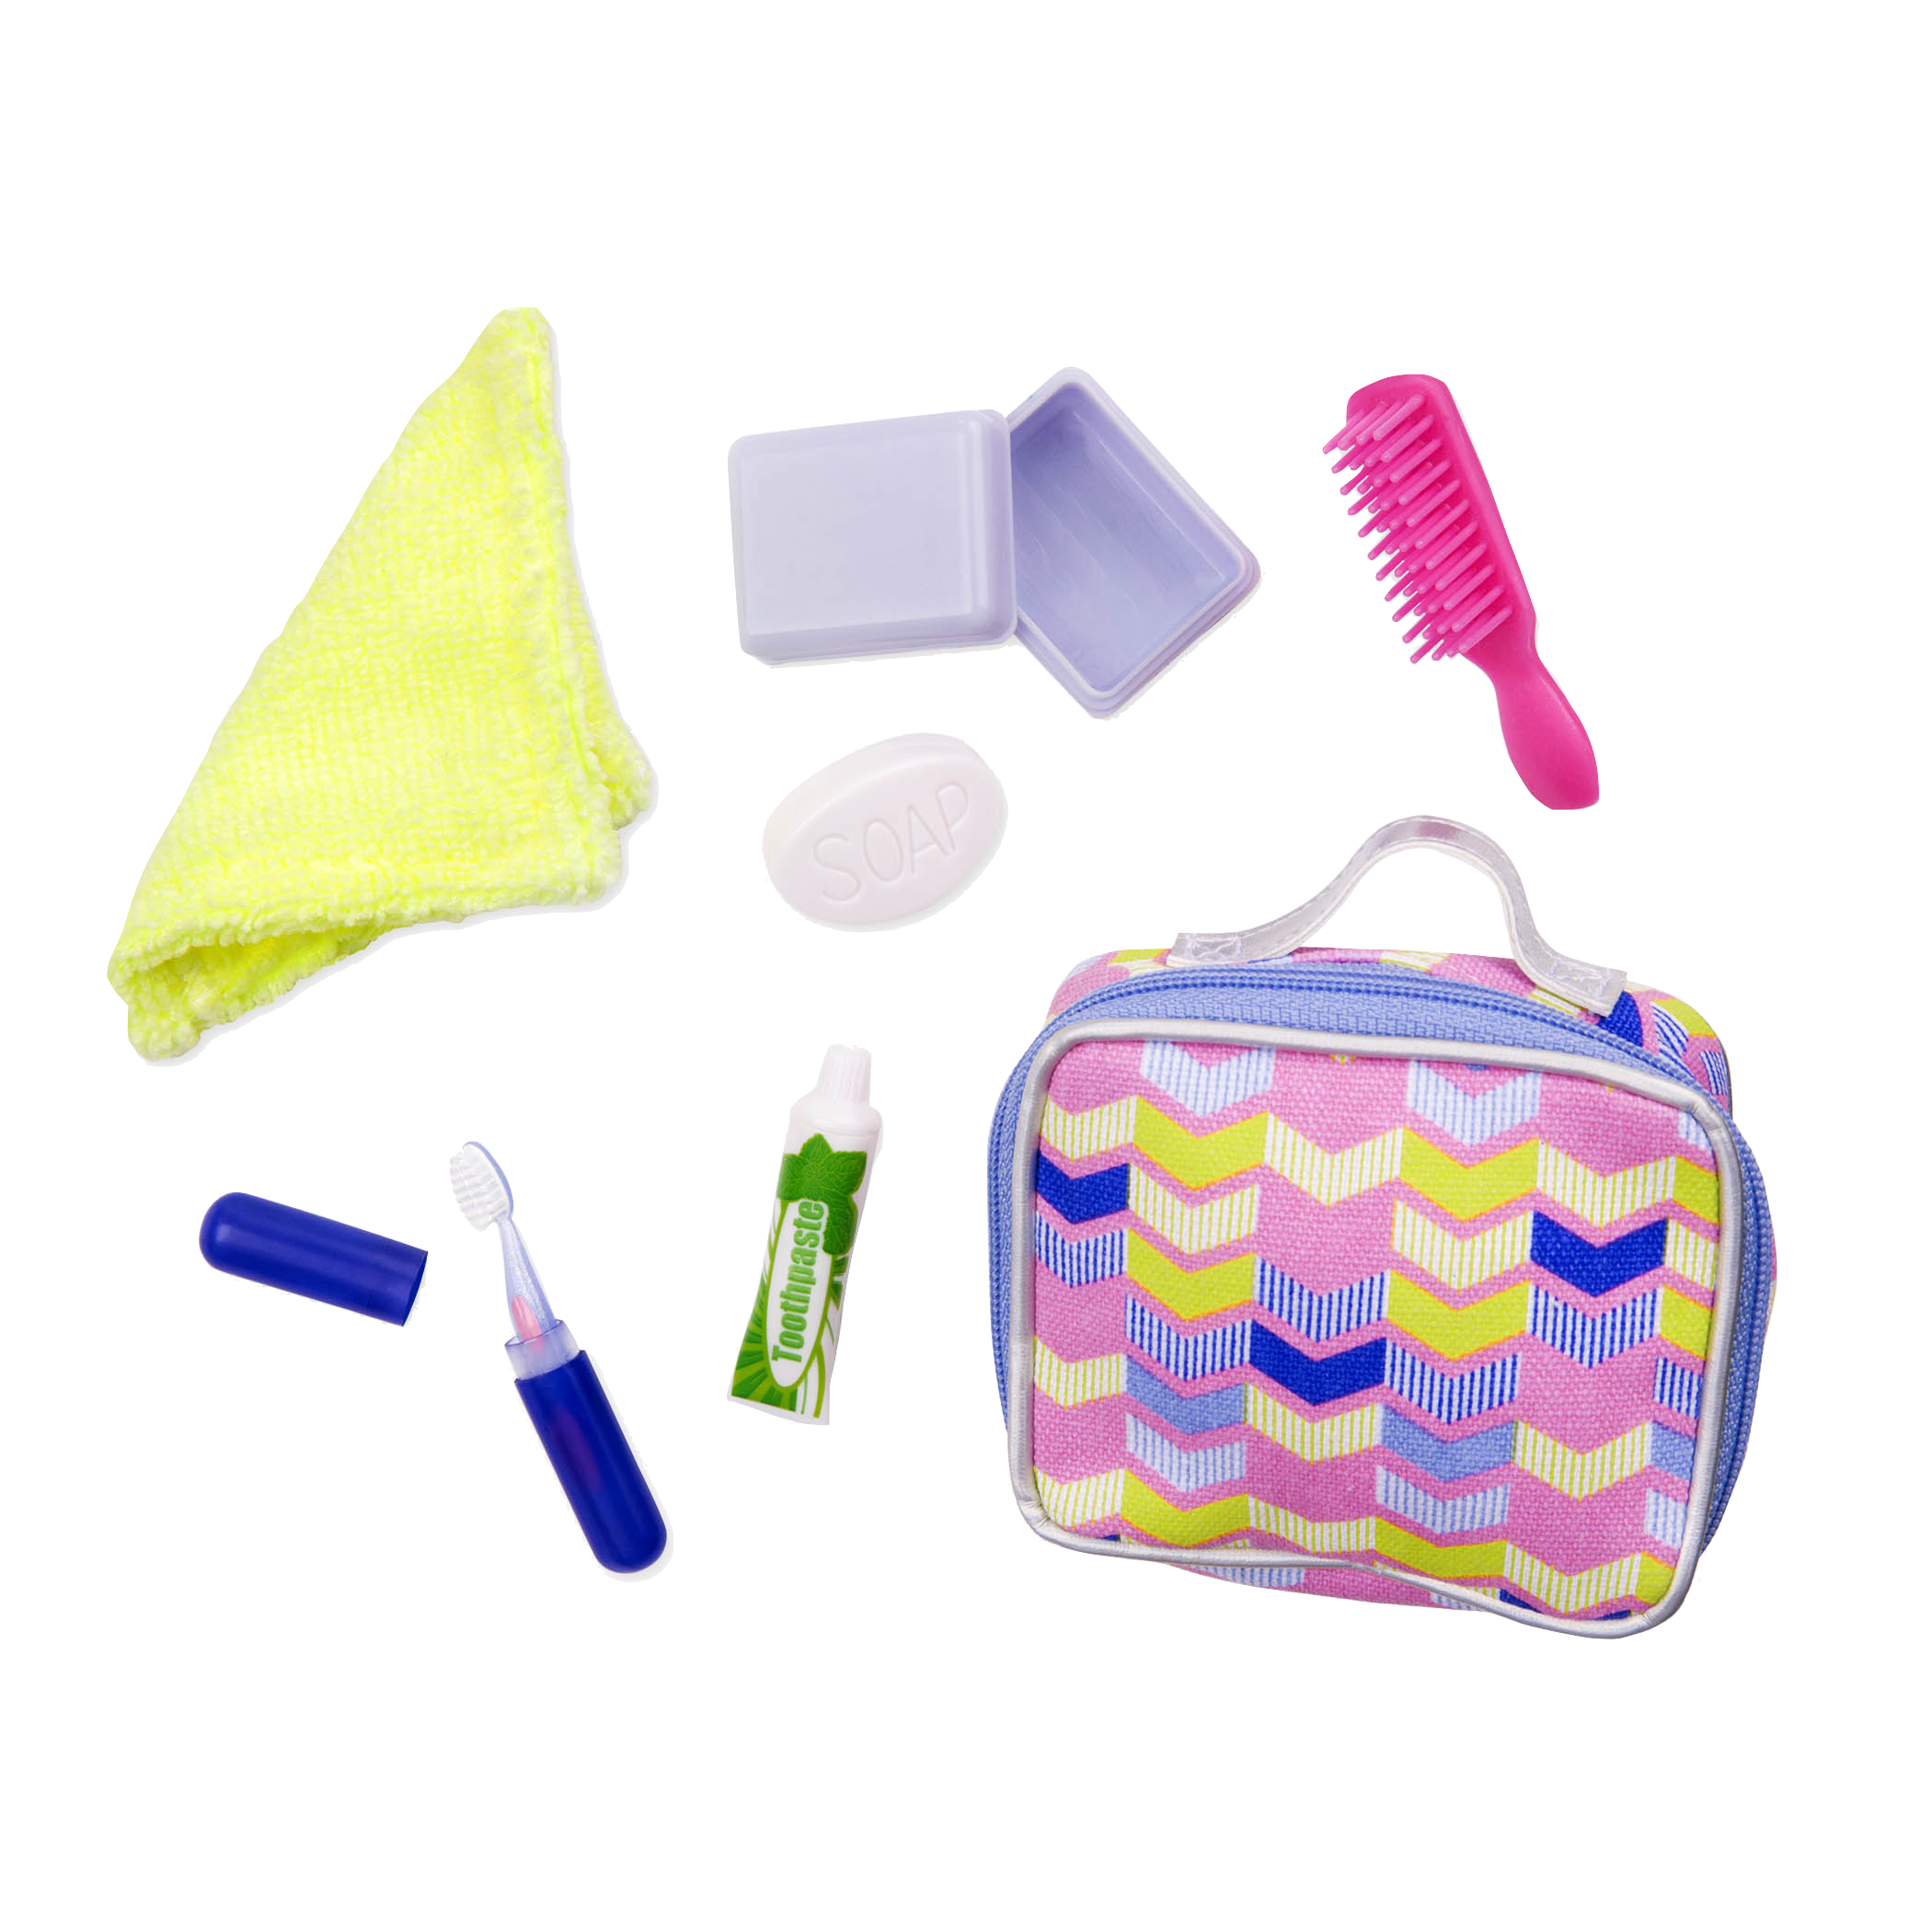 give your dolls all they need to stay overnight with this set!